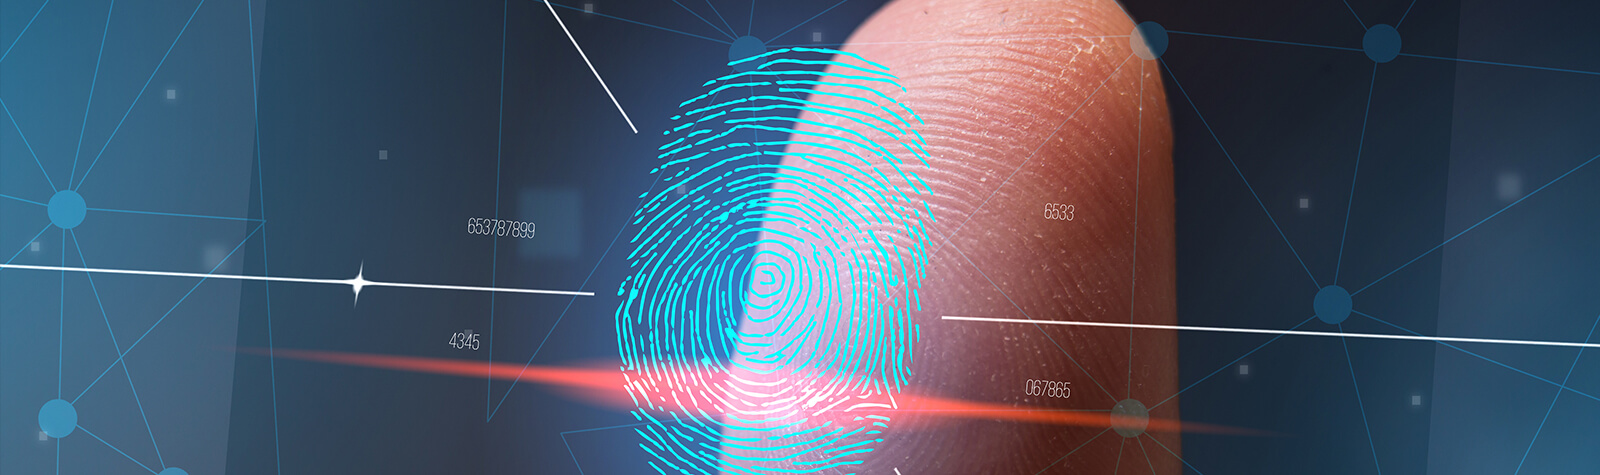 Biometrics and Access Control: Convenience or Privacy Invasion?